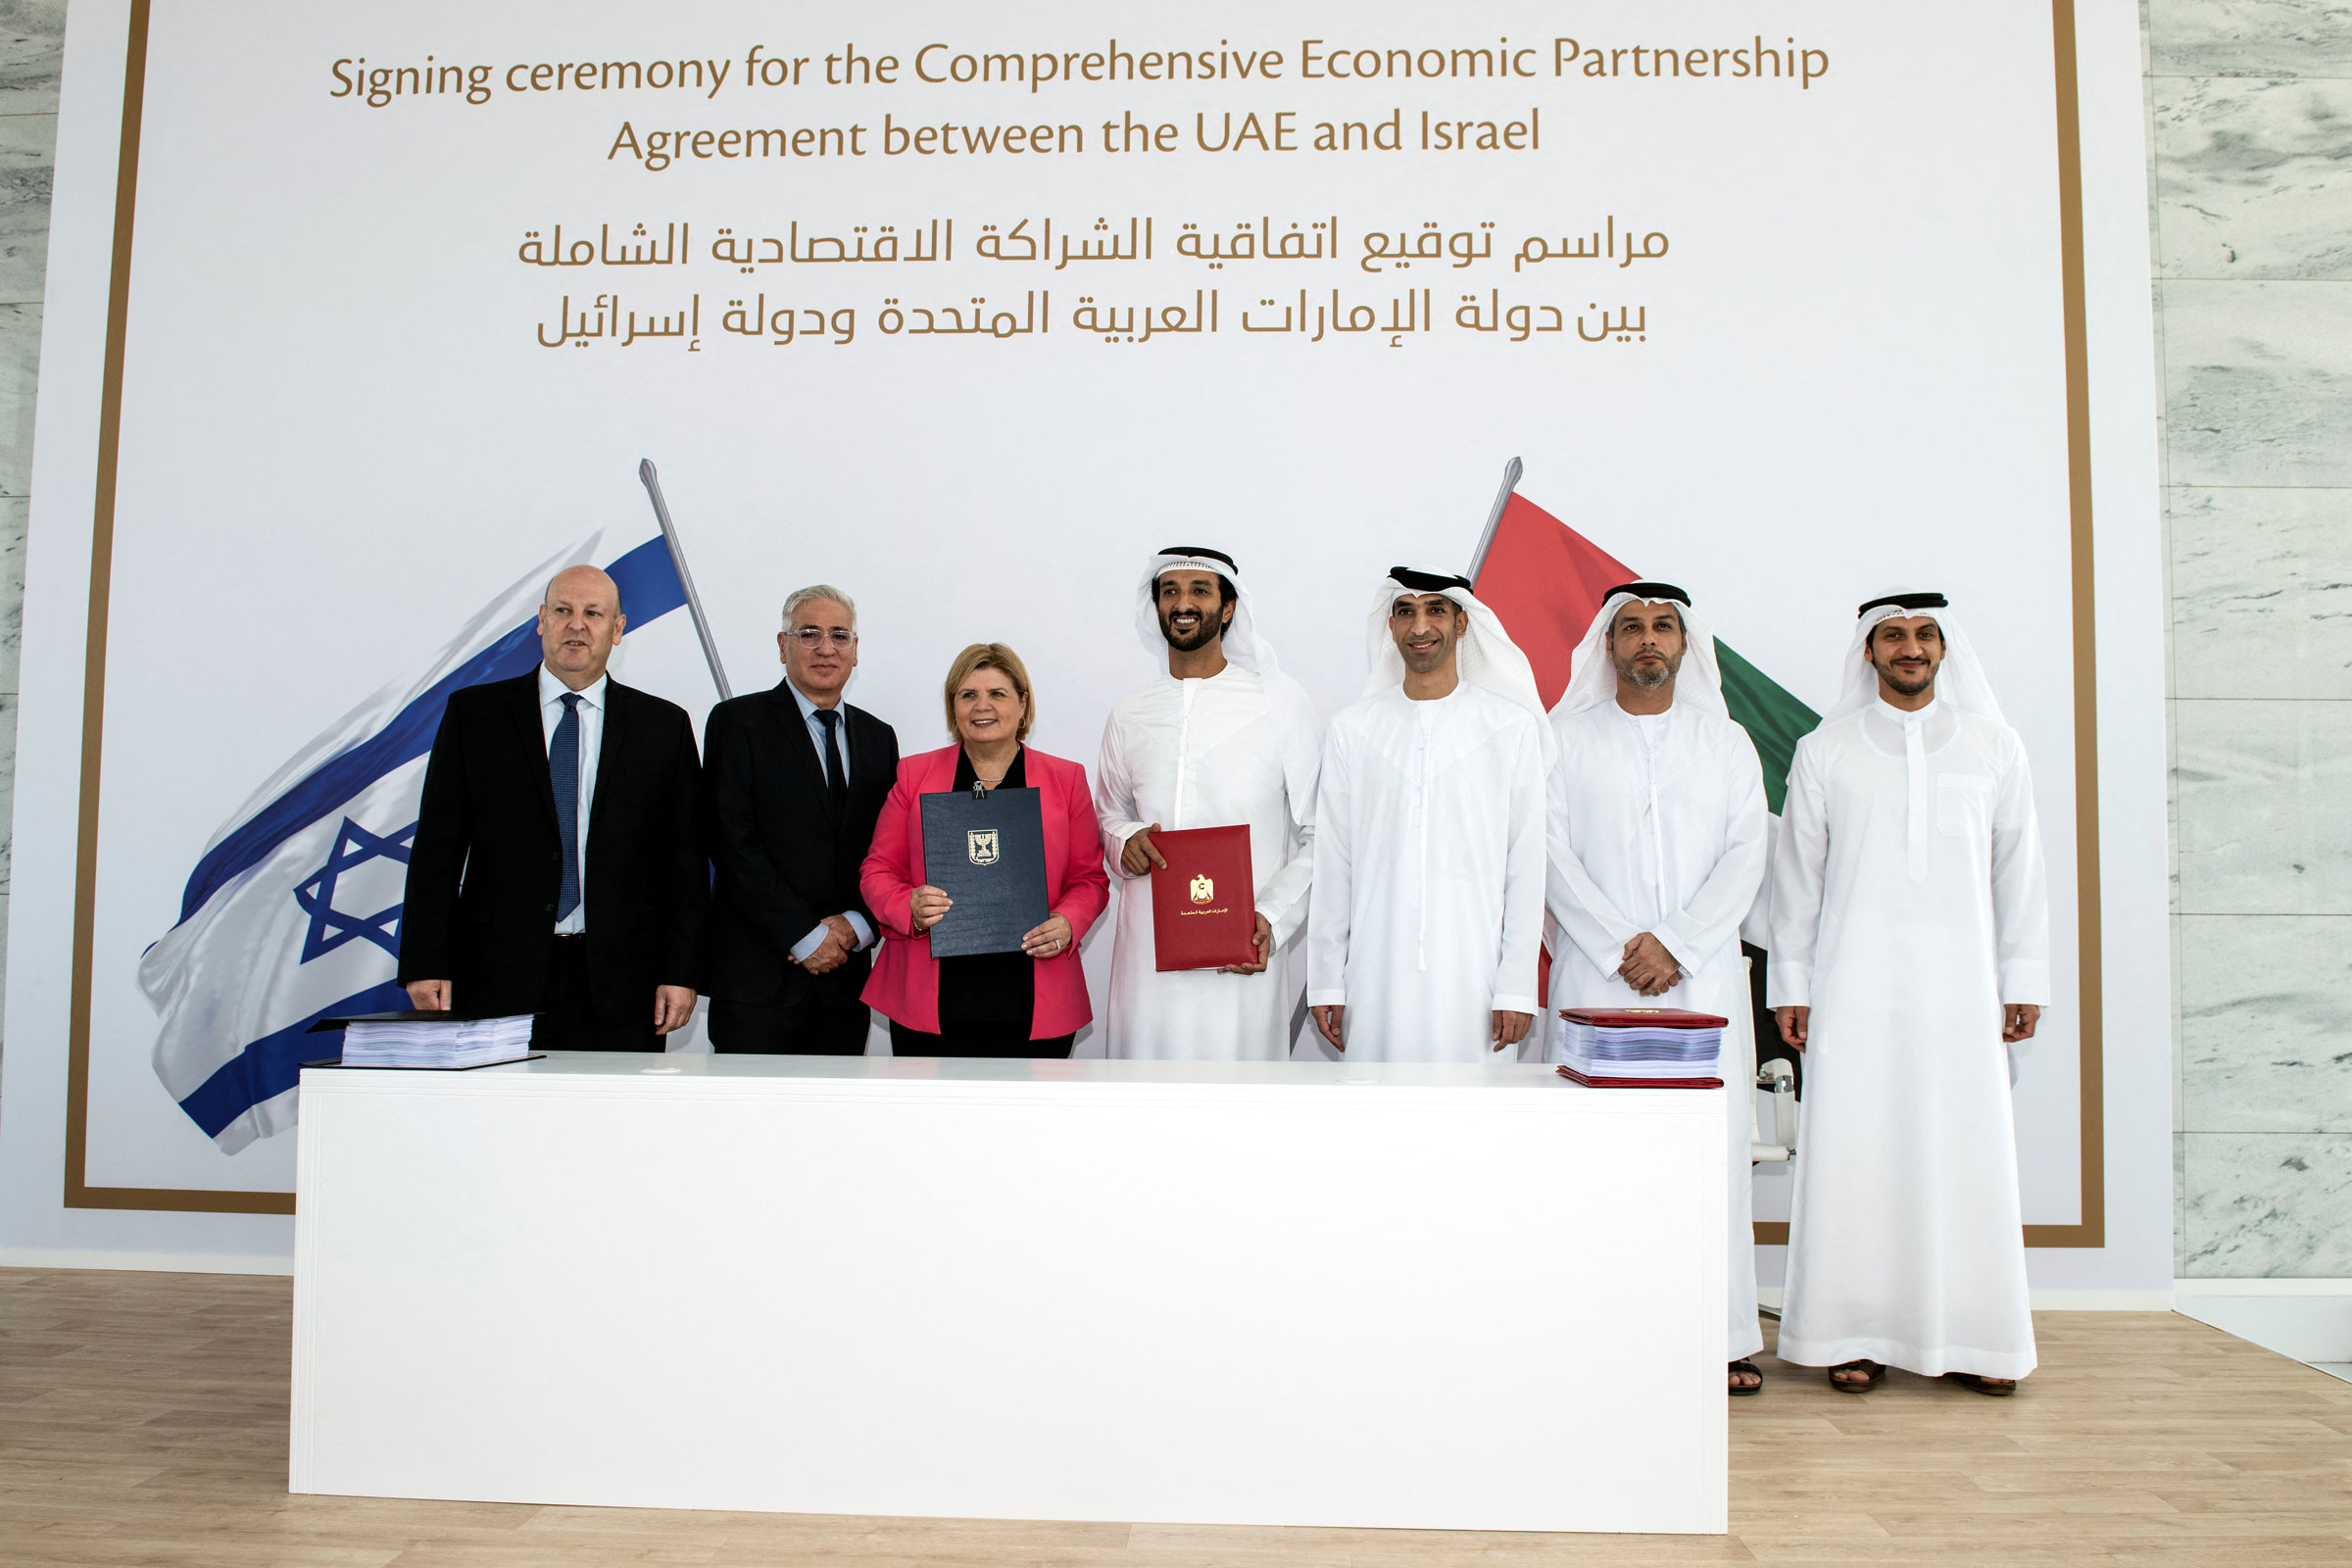 Israel's Minister of Economy and Industry Orna Barbivai, UAE Minister of Economy Abdulla bin Touq Al Marri and other officials present the Free Trade Agreement they signed